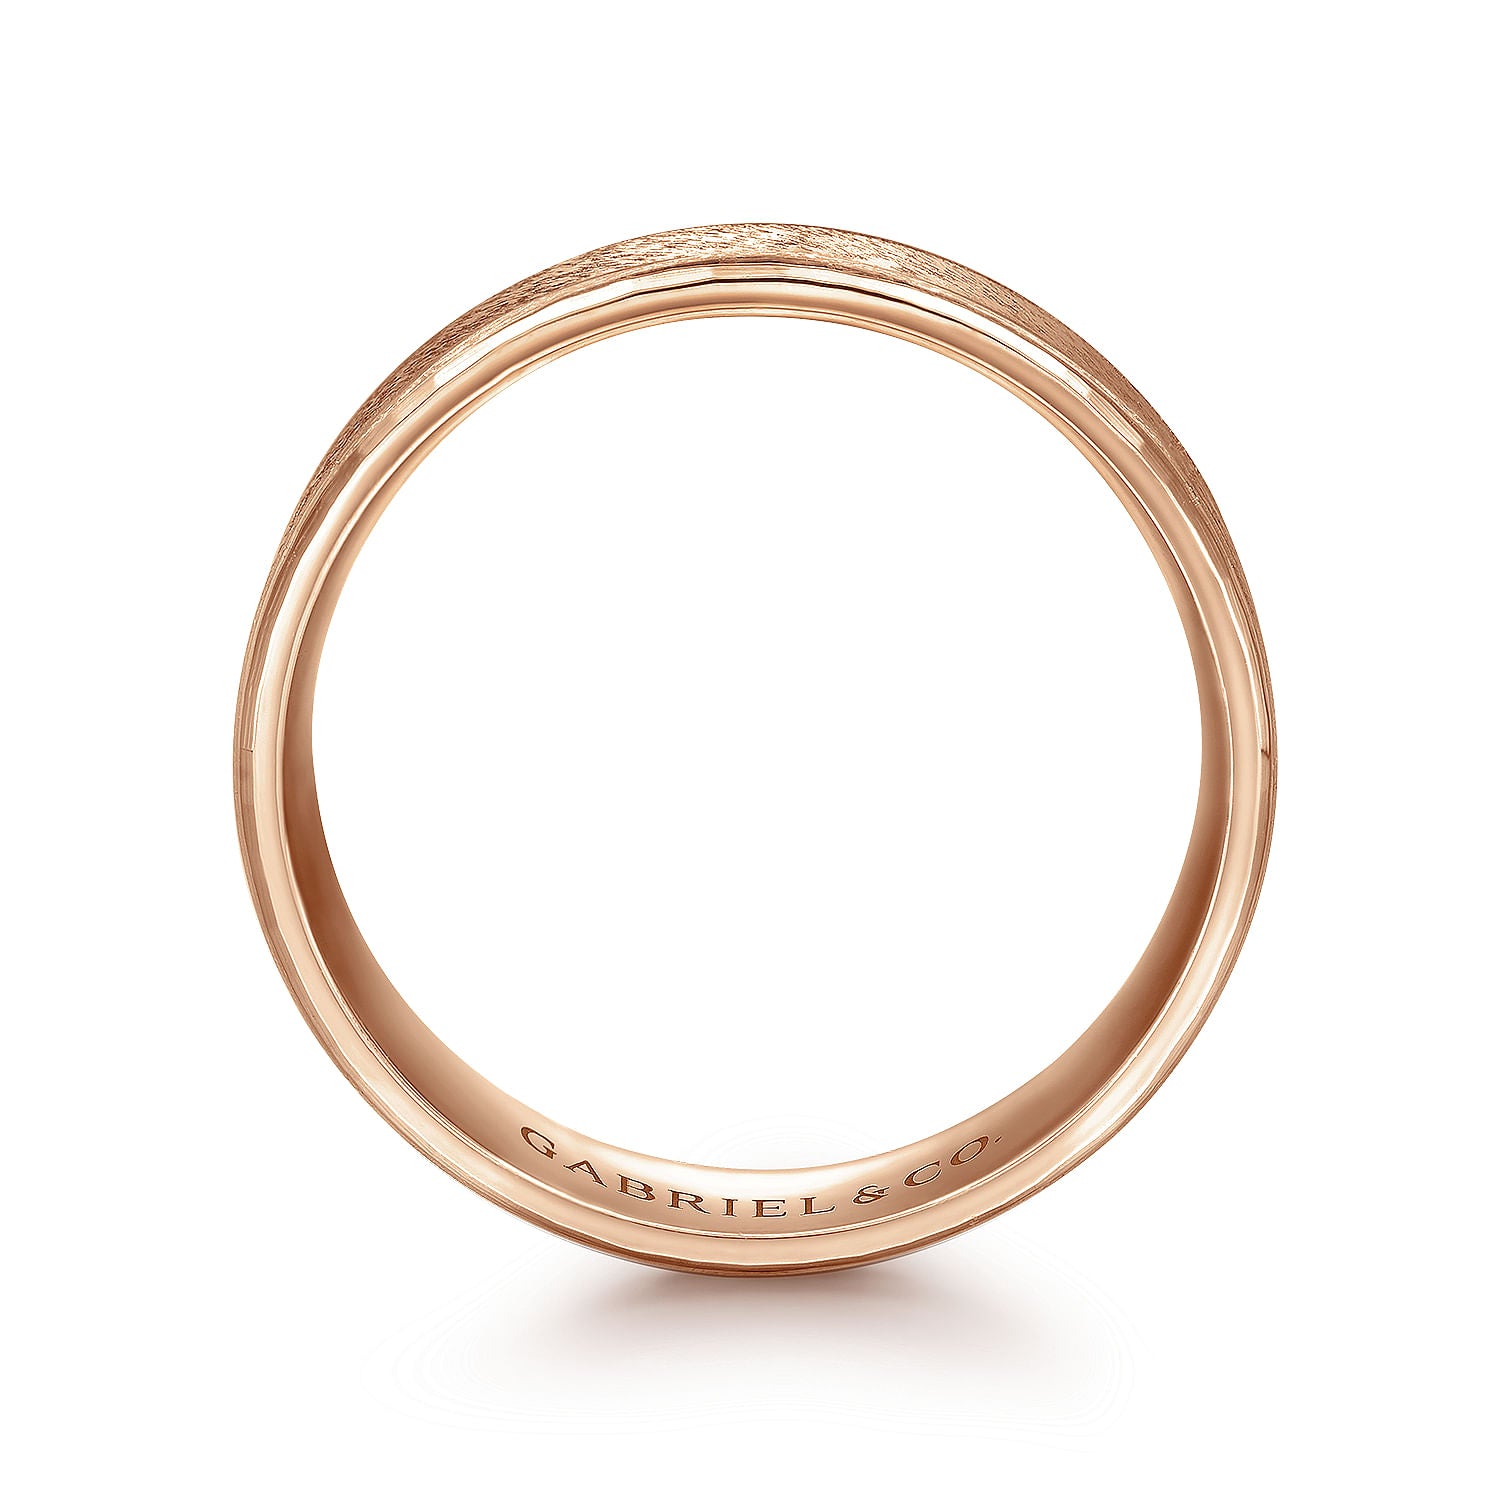 Gabriel & Co Rose Gold Wedding Band With A Brushed Finished Center And A Beveled Edge - Gold Wedding Bands - Men's